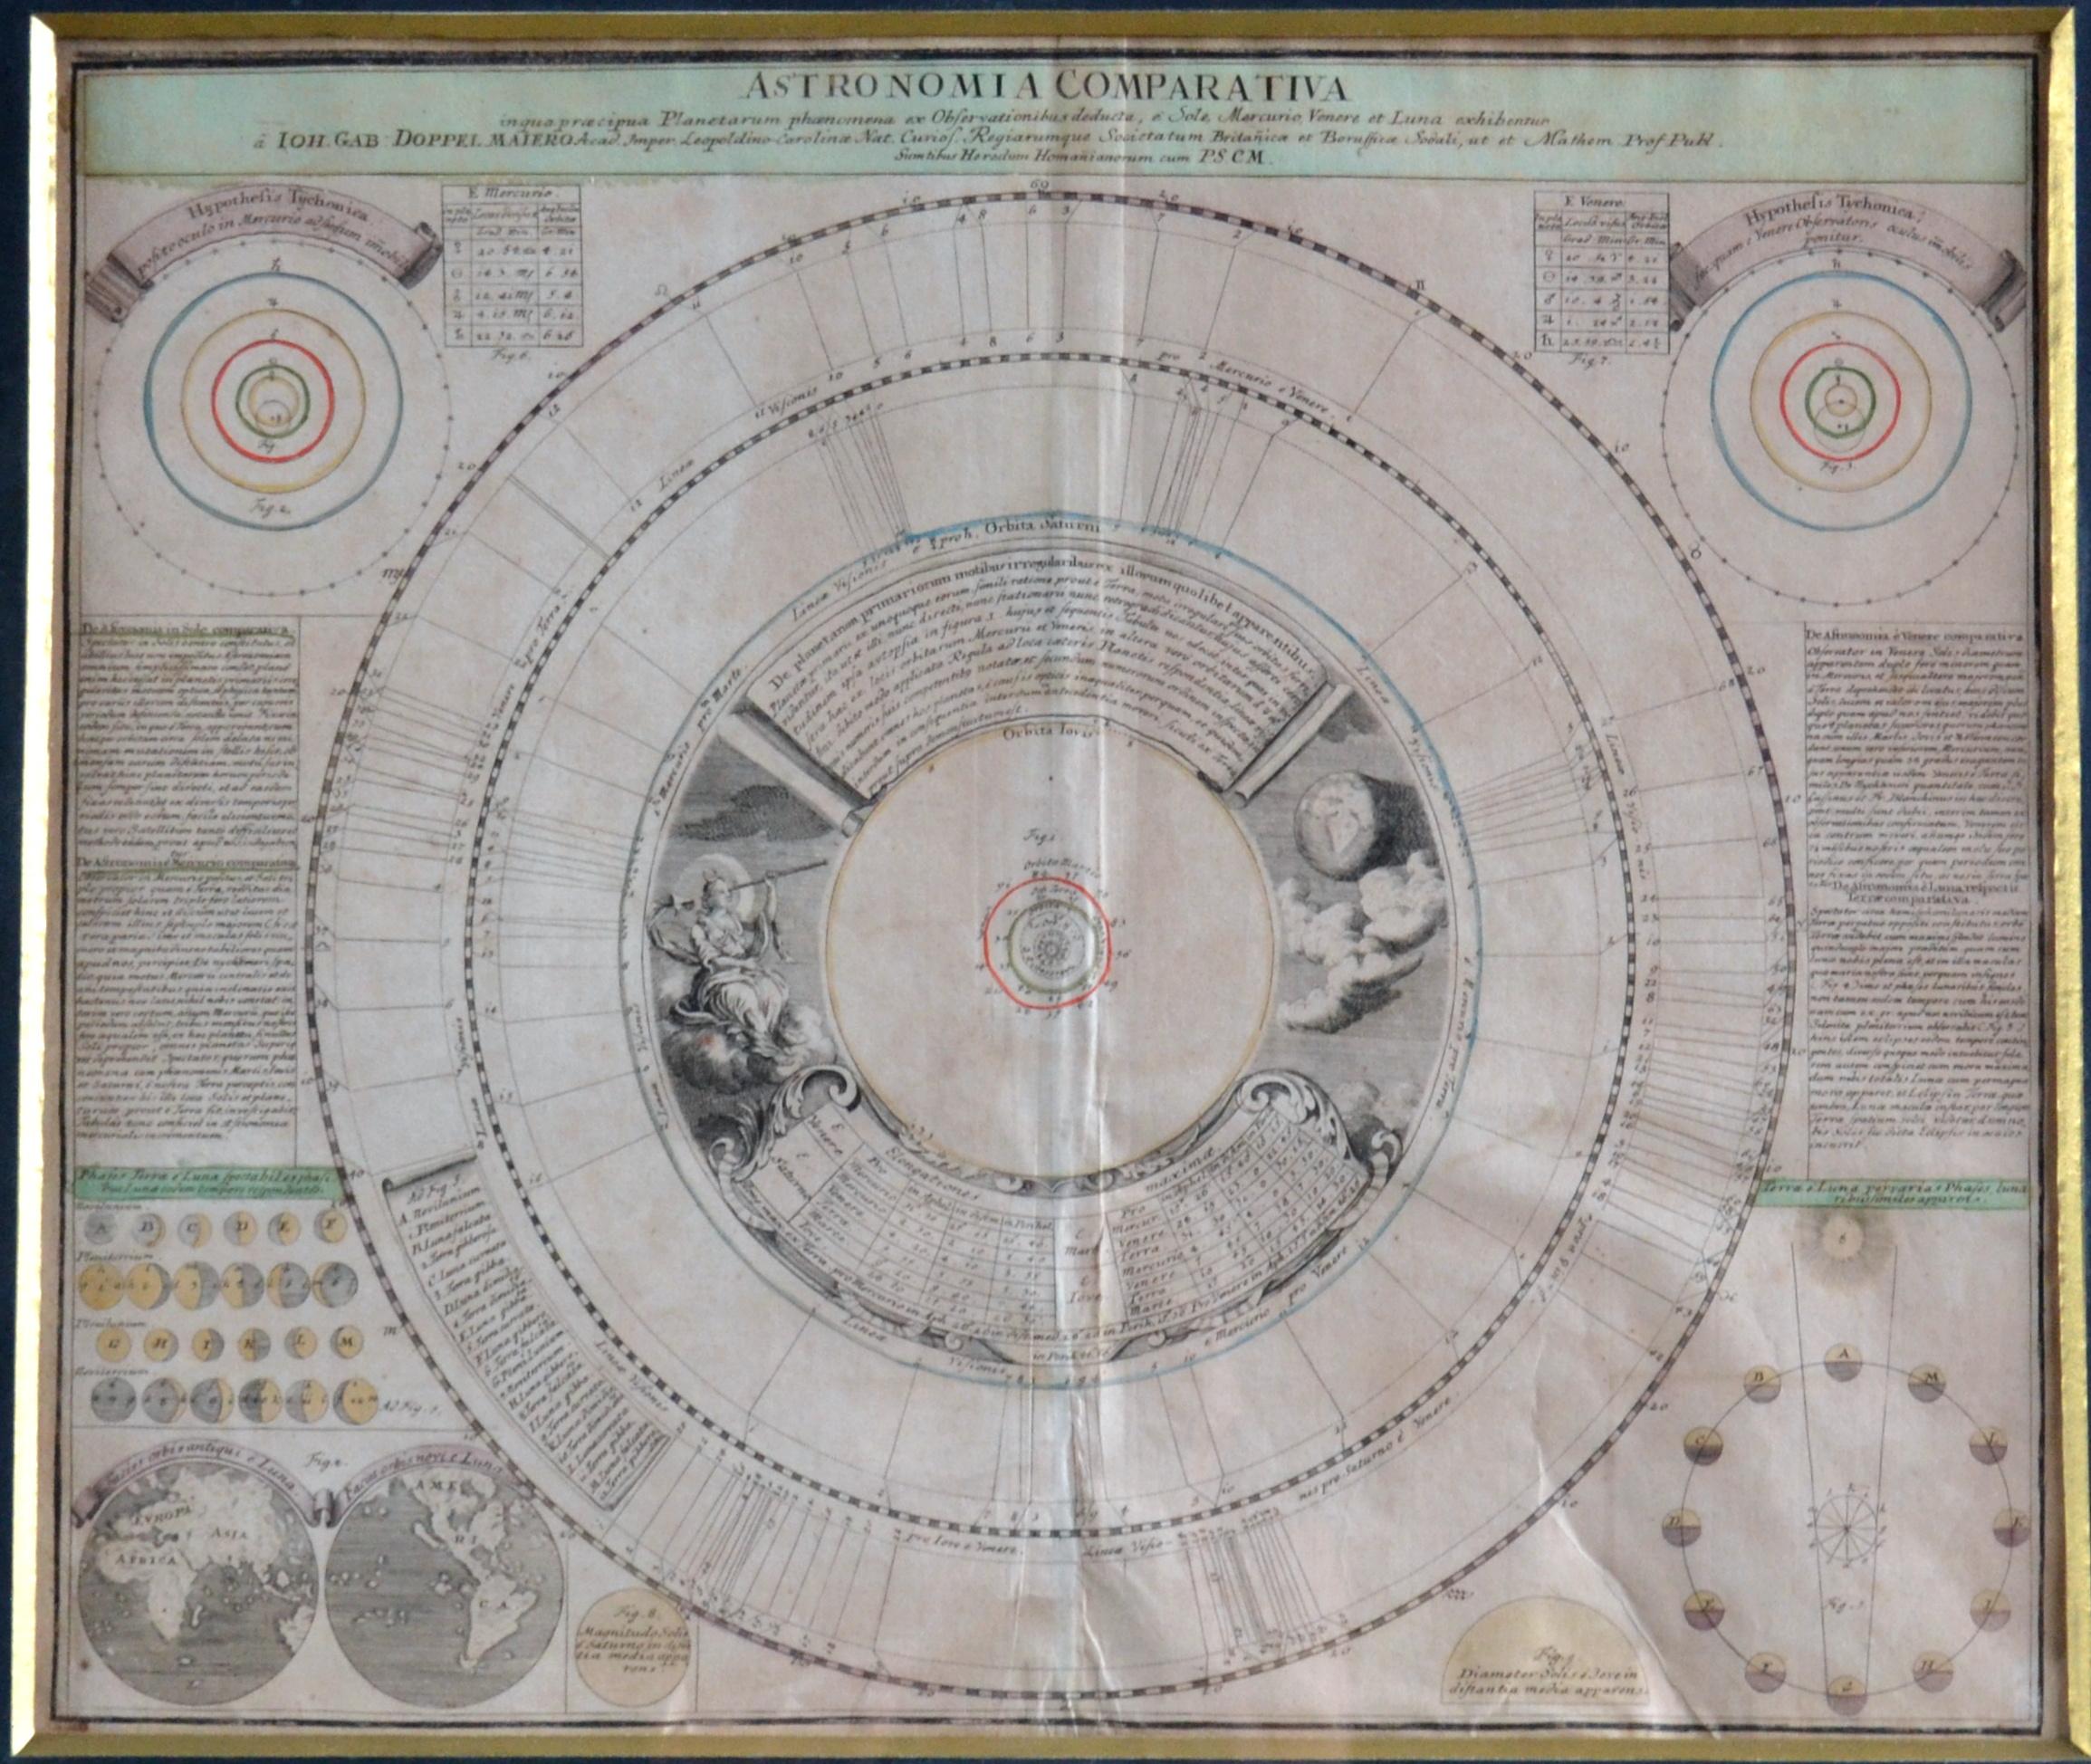 Six original 18th century copper-engraving of celestial charts etchings issued by Homann. Doppelmayr is the cartographer, astronomer and mathematician. He held the post of Professor of Mathematics at the Aegidien Gymnasium, Nuremberg from 1704-1750.